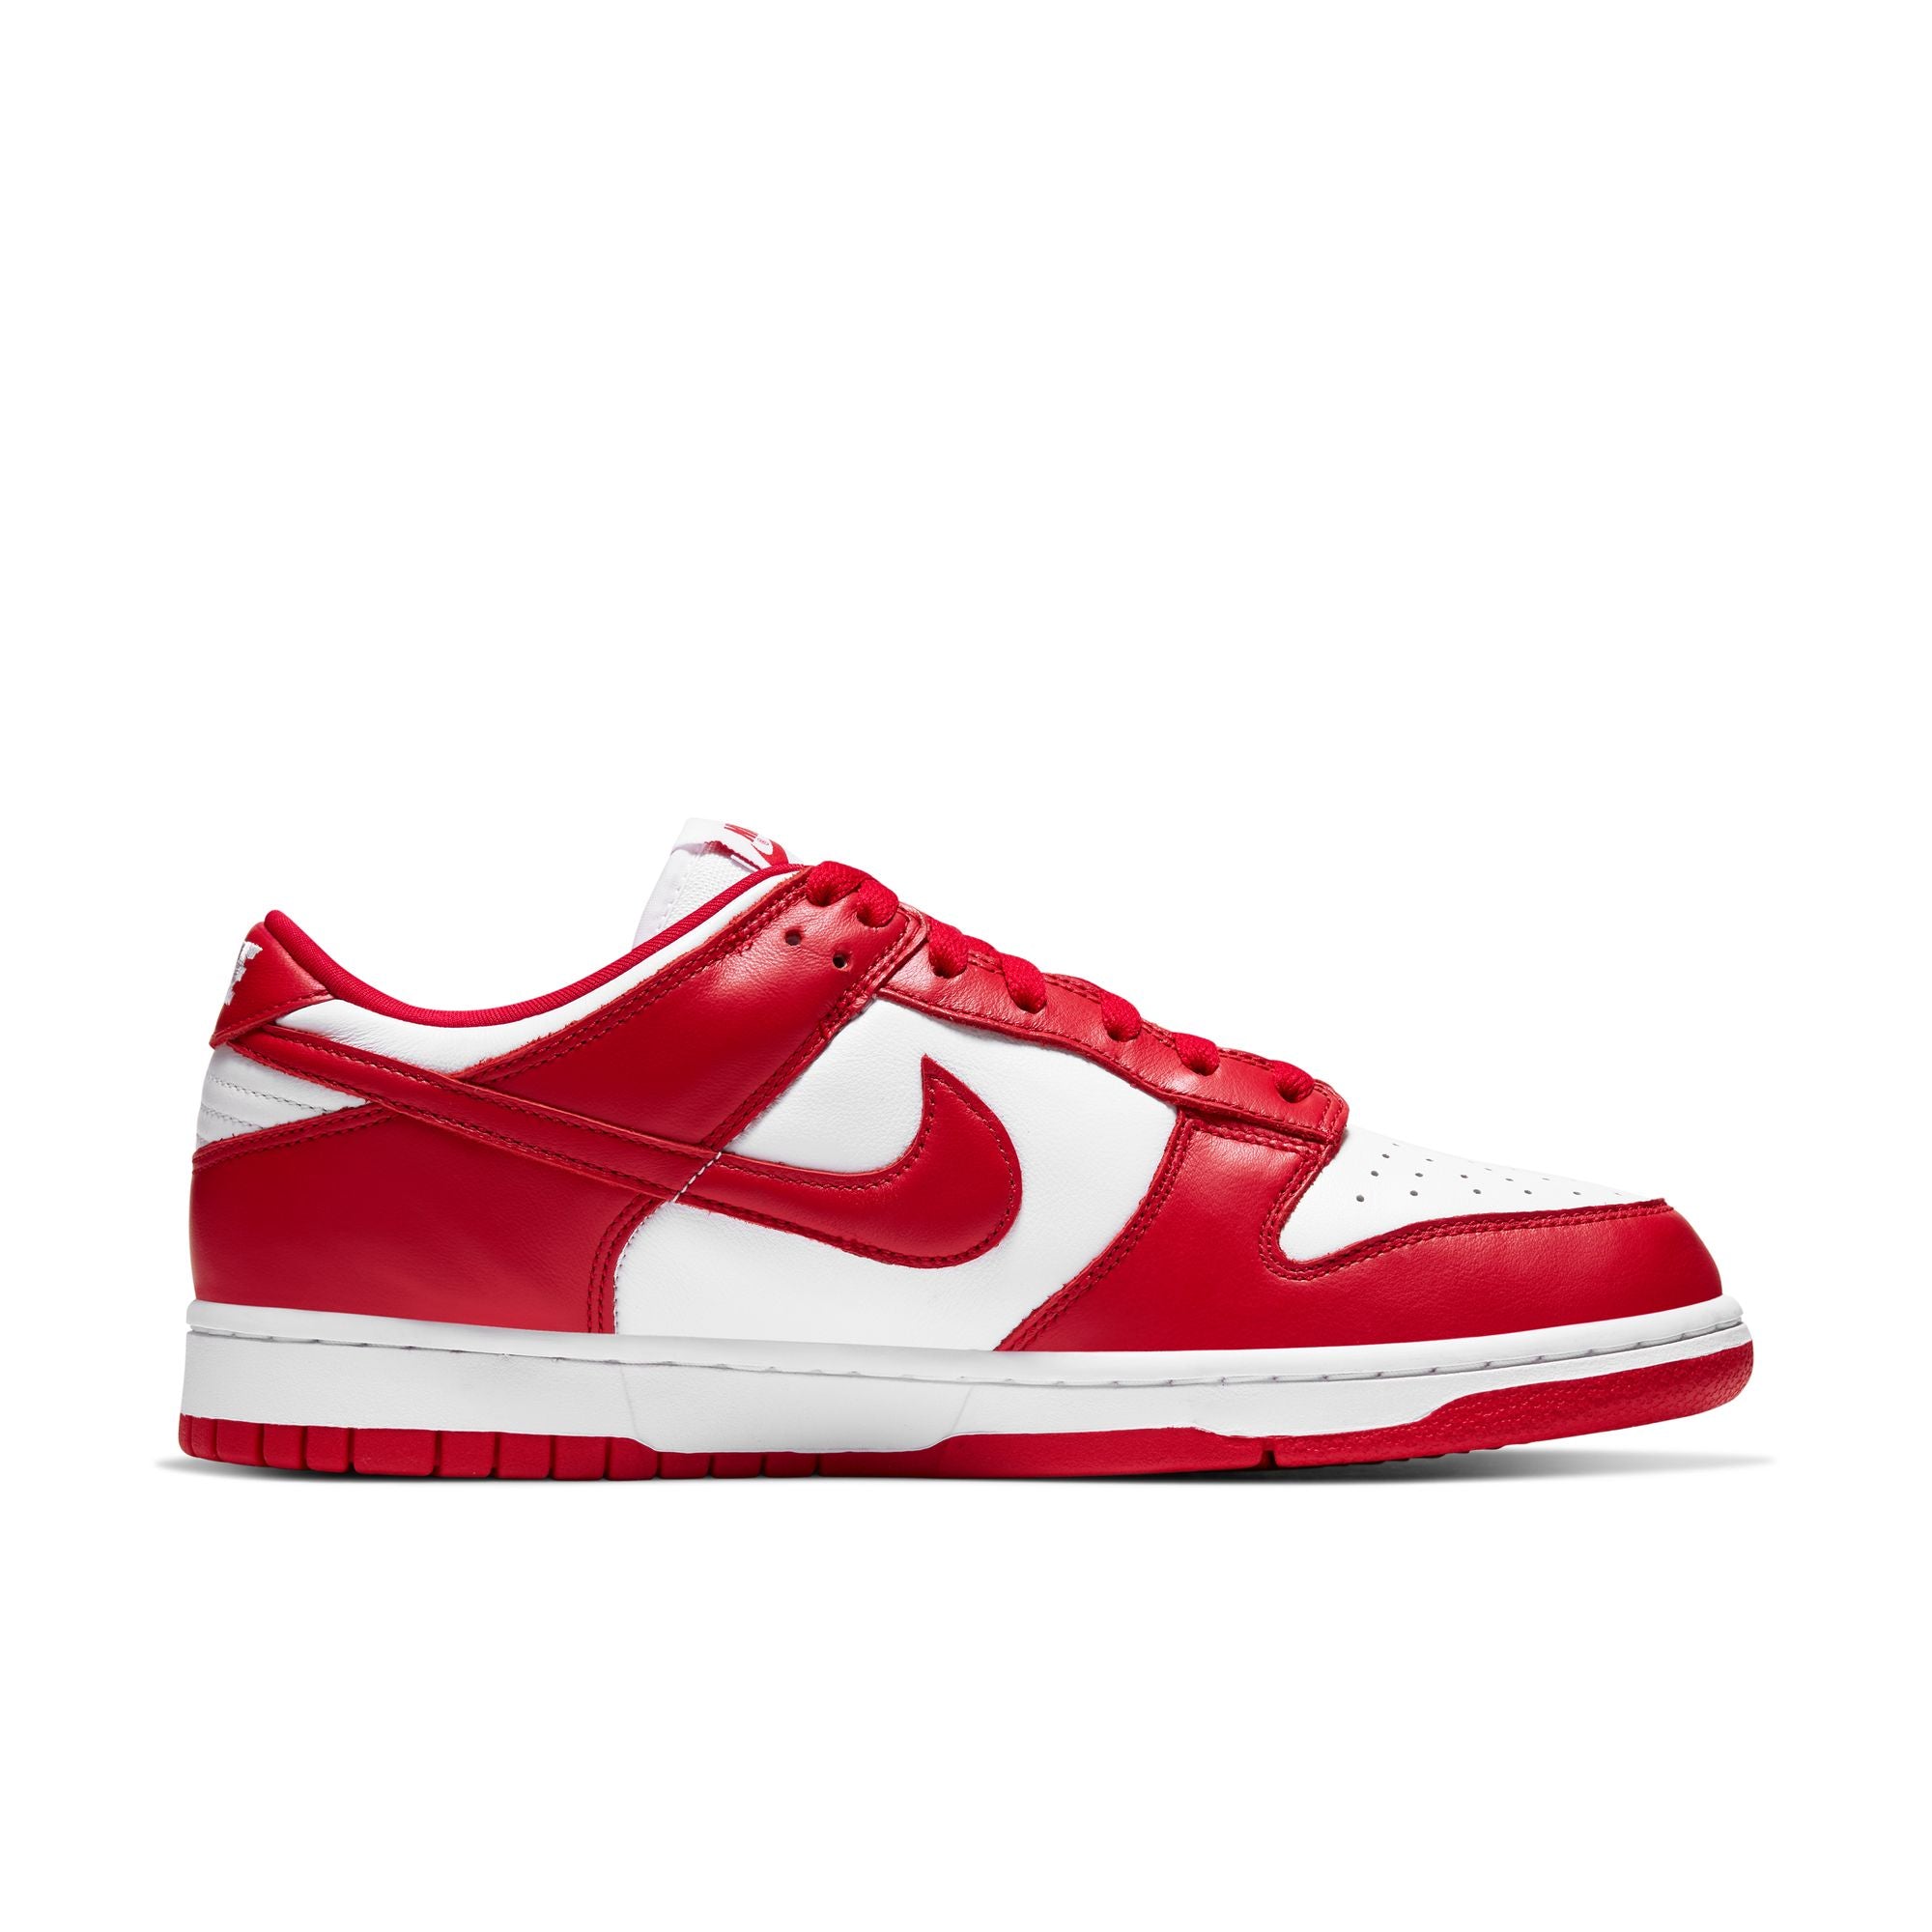 NIKE - Nike Dunk Low Sp - (White/University Red) view 1